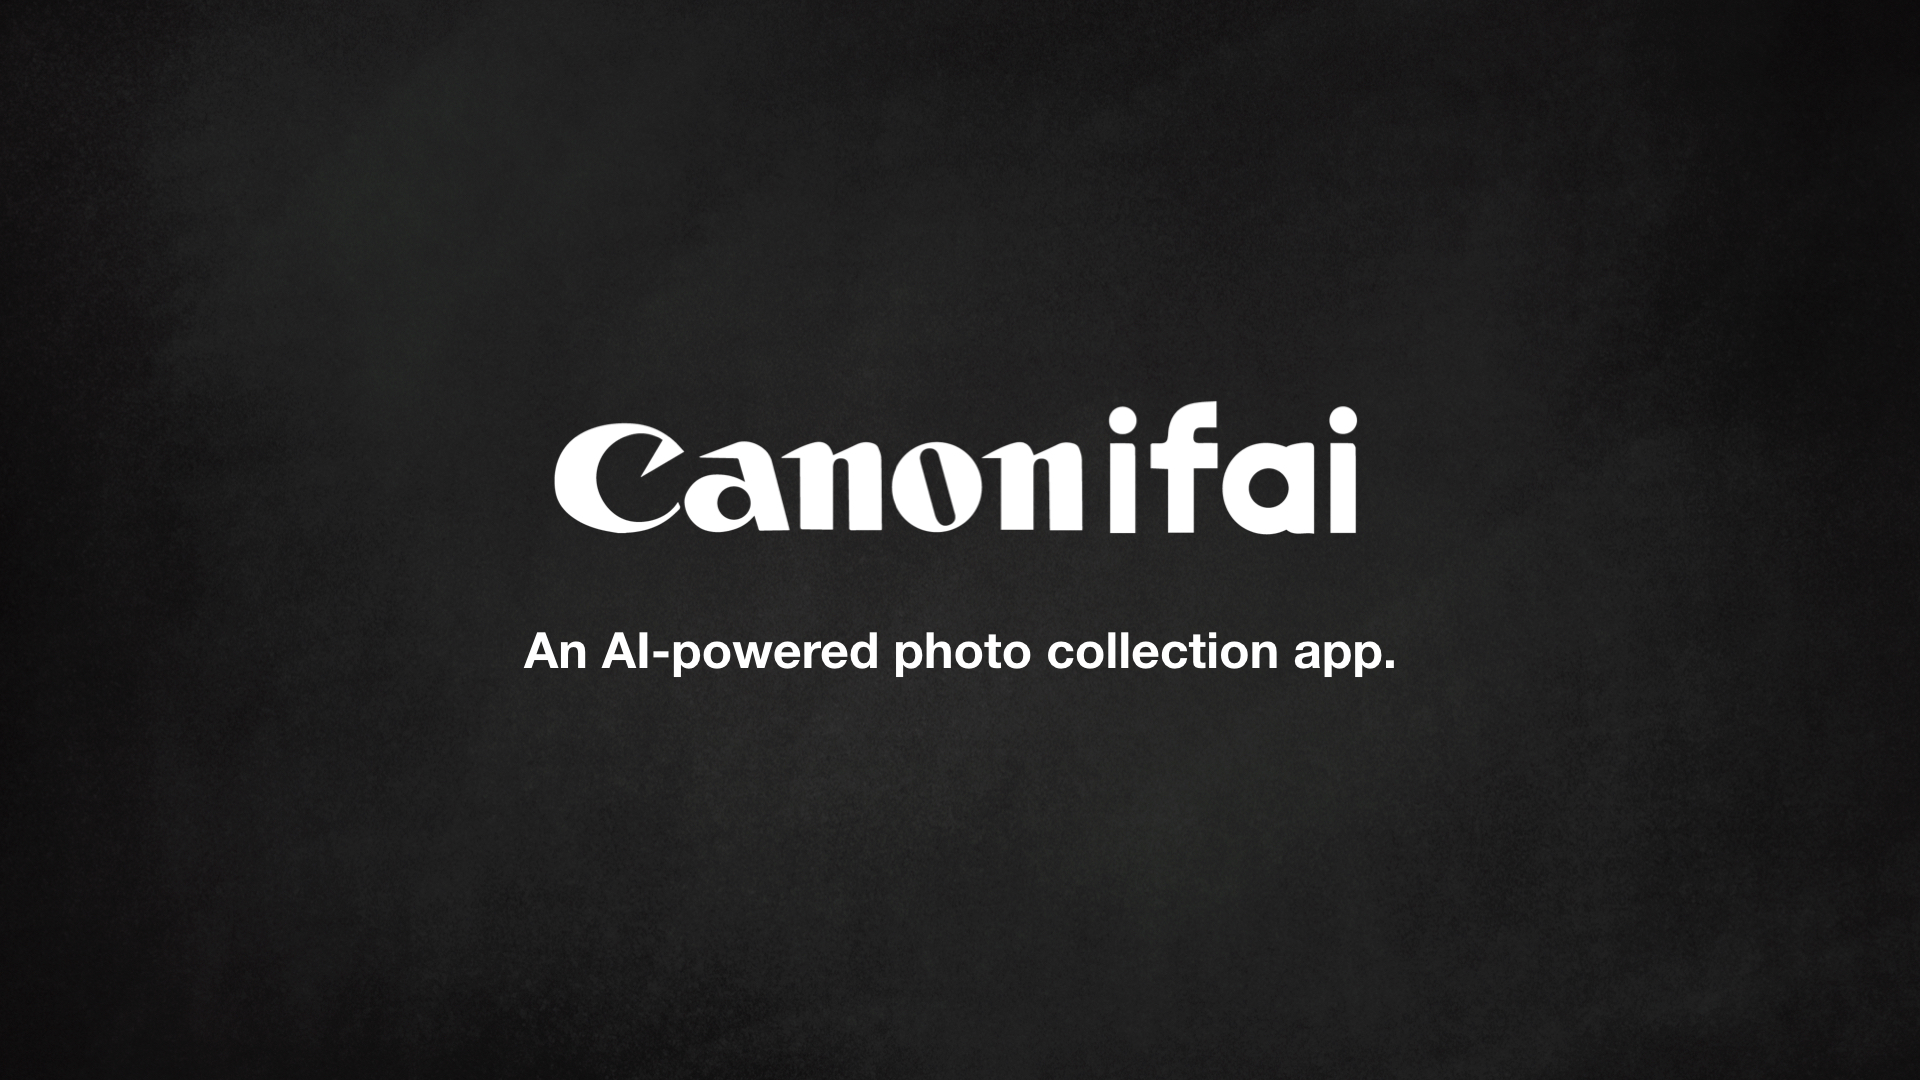  Using AI and machine learning, Canonifai uses Canon’s CCAPI and Clarifai’s API to tag photos with keywords and organize them into a smart collection. 